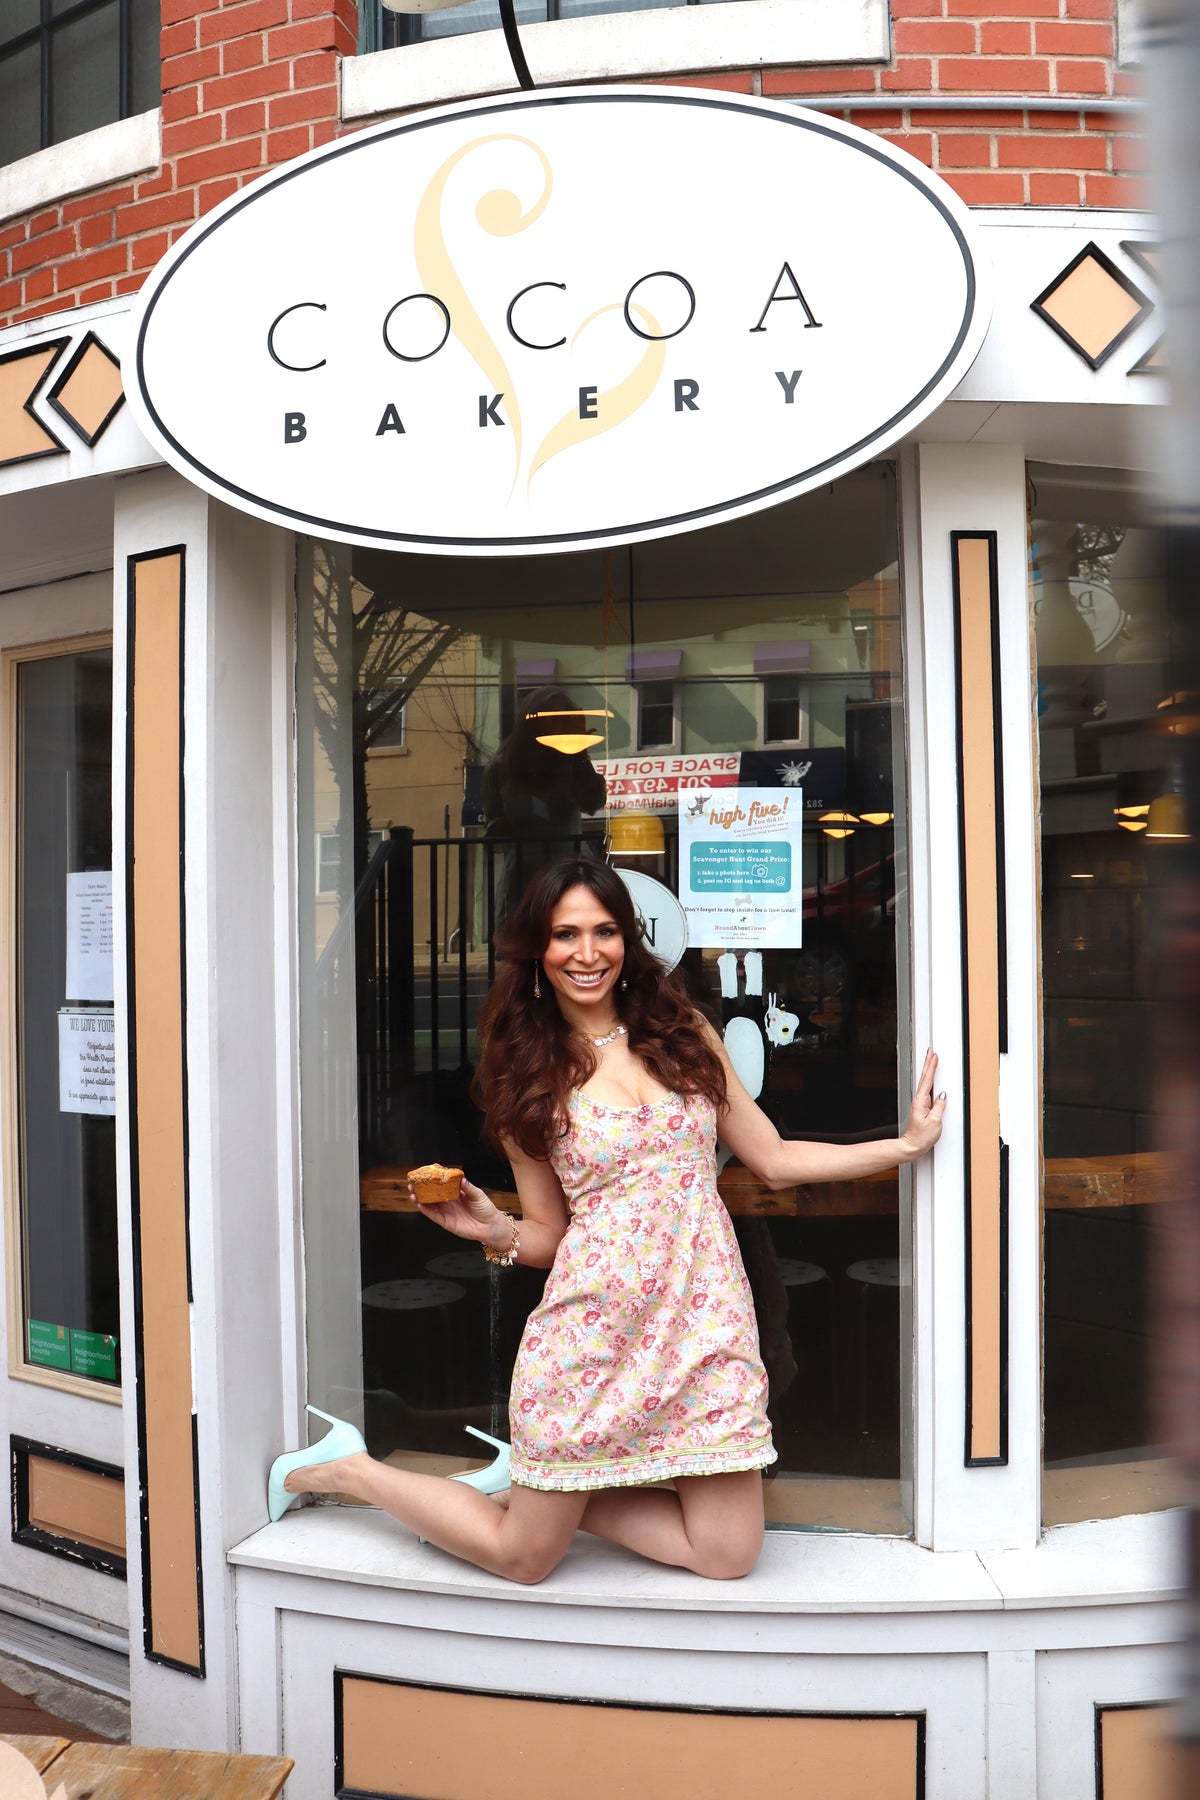 Model wearing a pink, green and blue floral print dress smiling in the window of Cocoa Bakery.